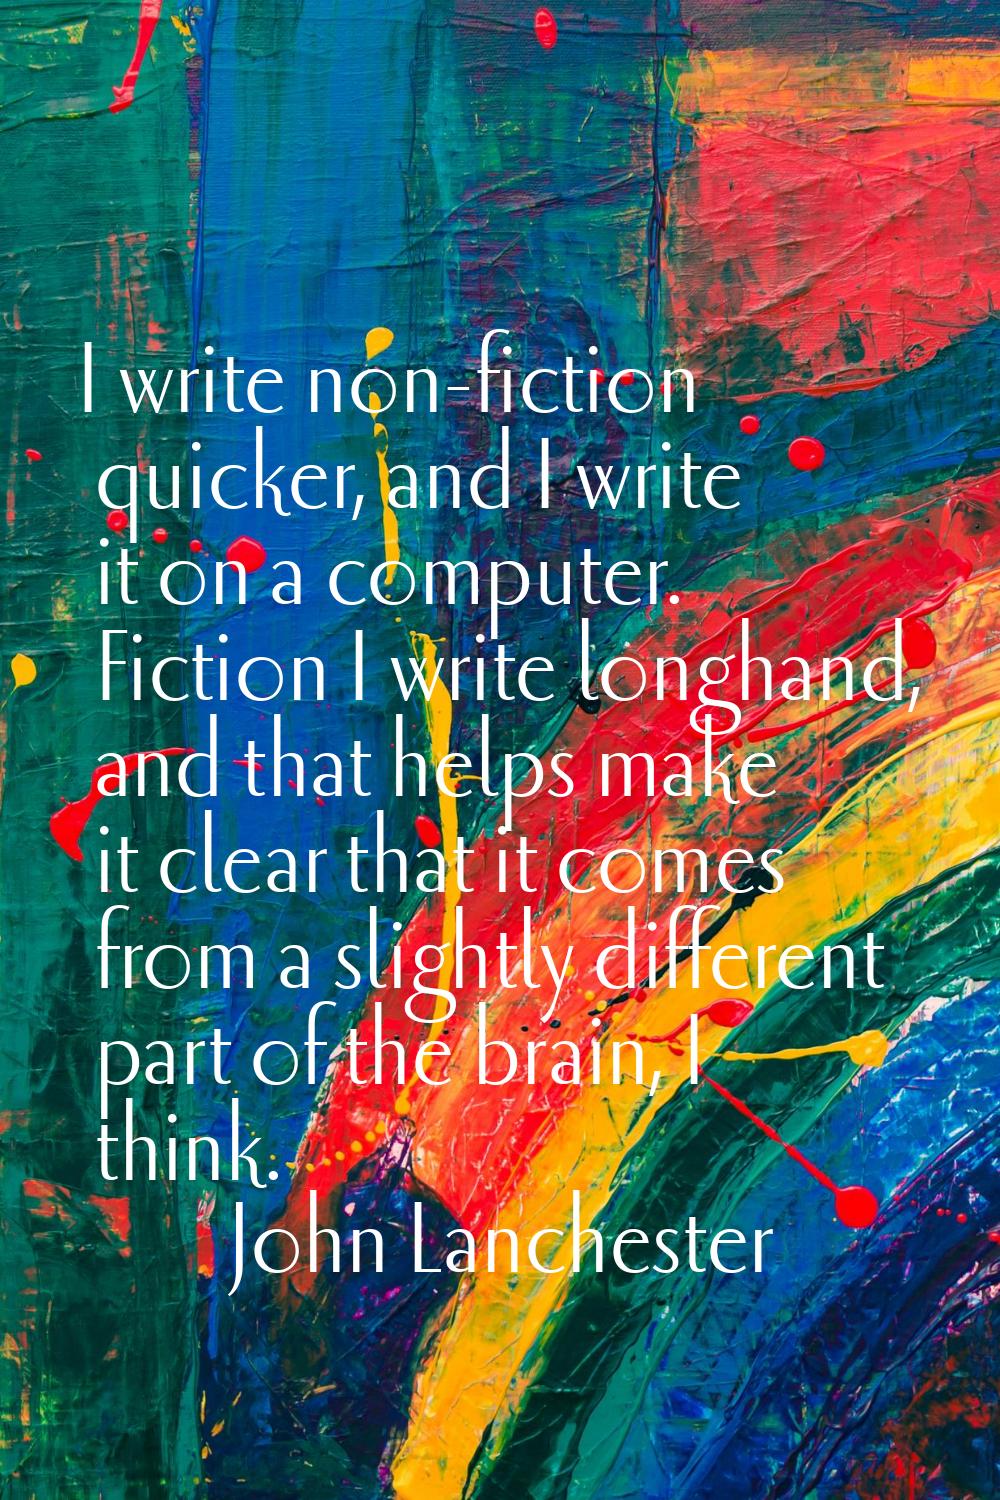 I write non-fiction quicker, and I write it on a computer. Fiction I write longhand, and that helps